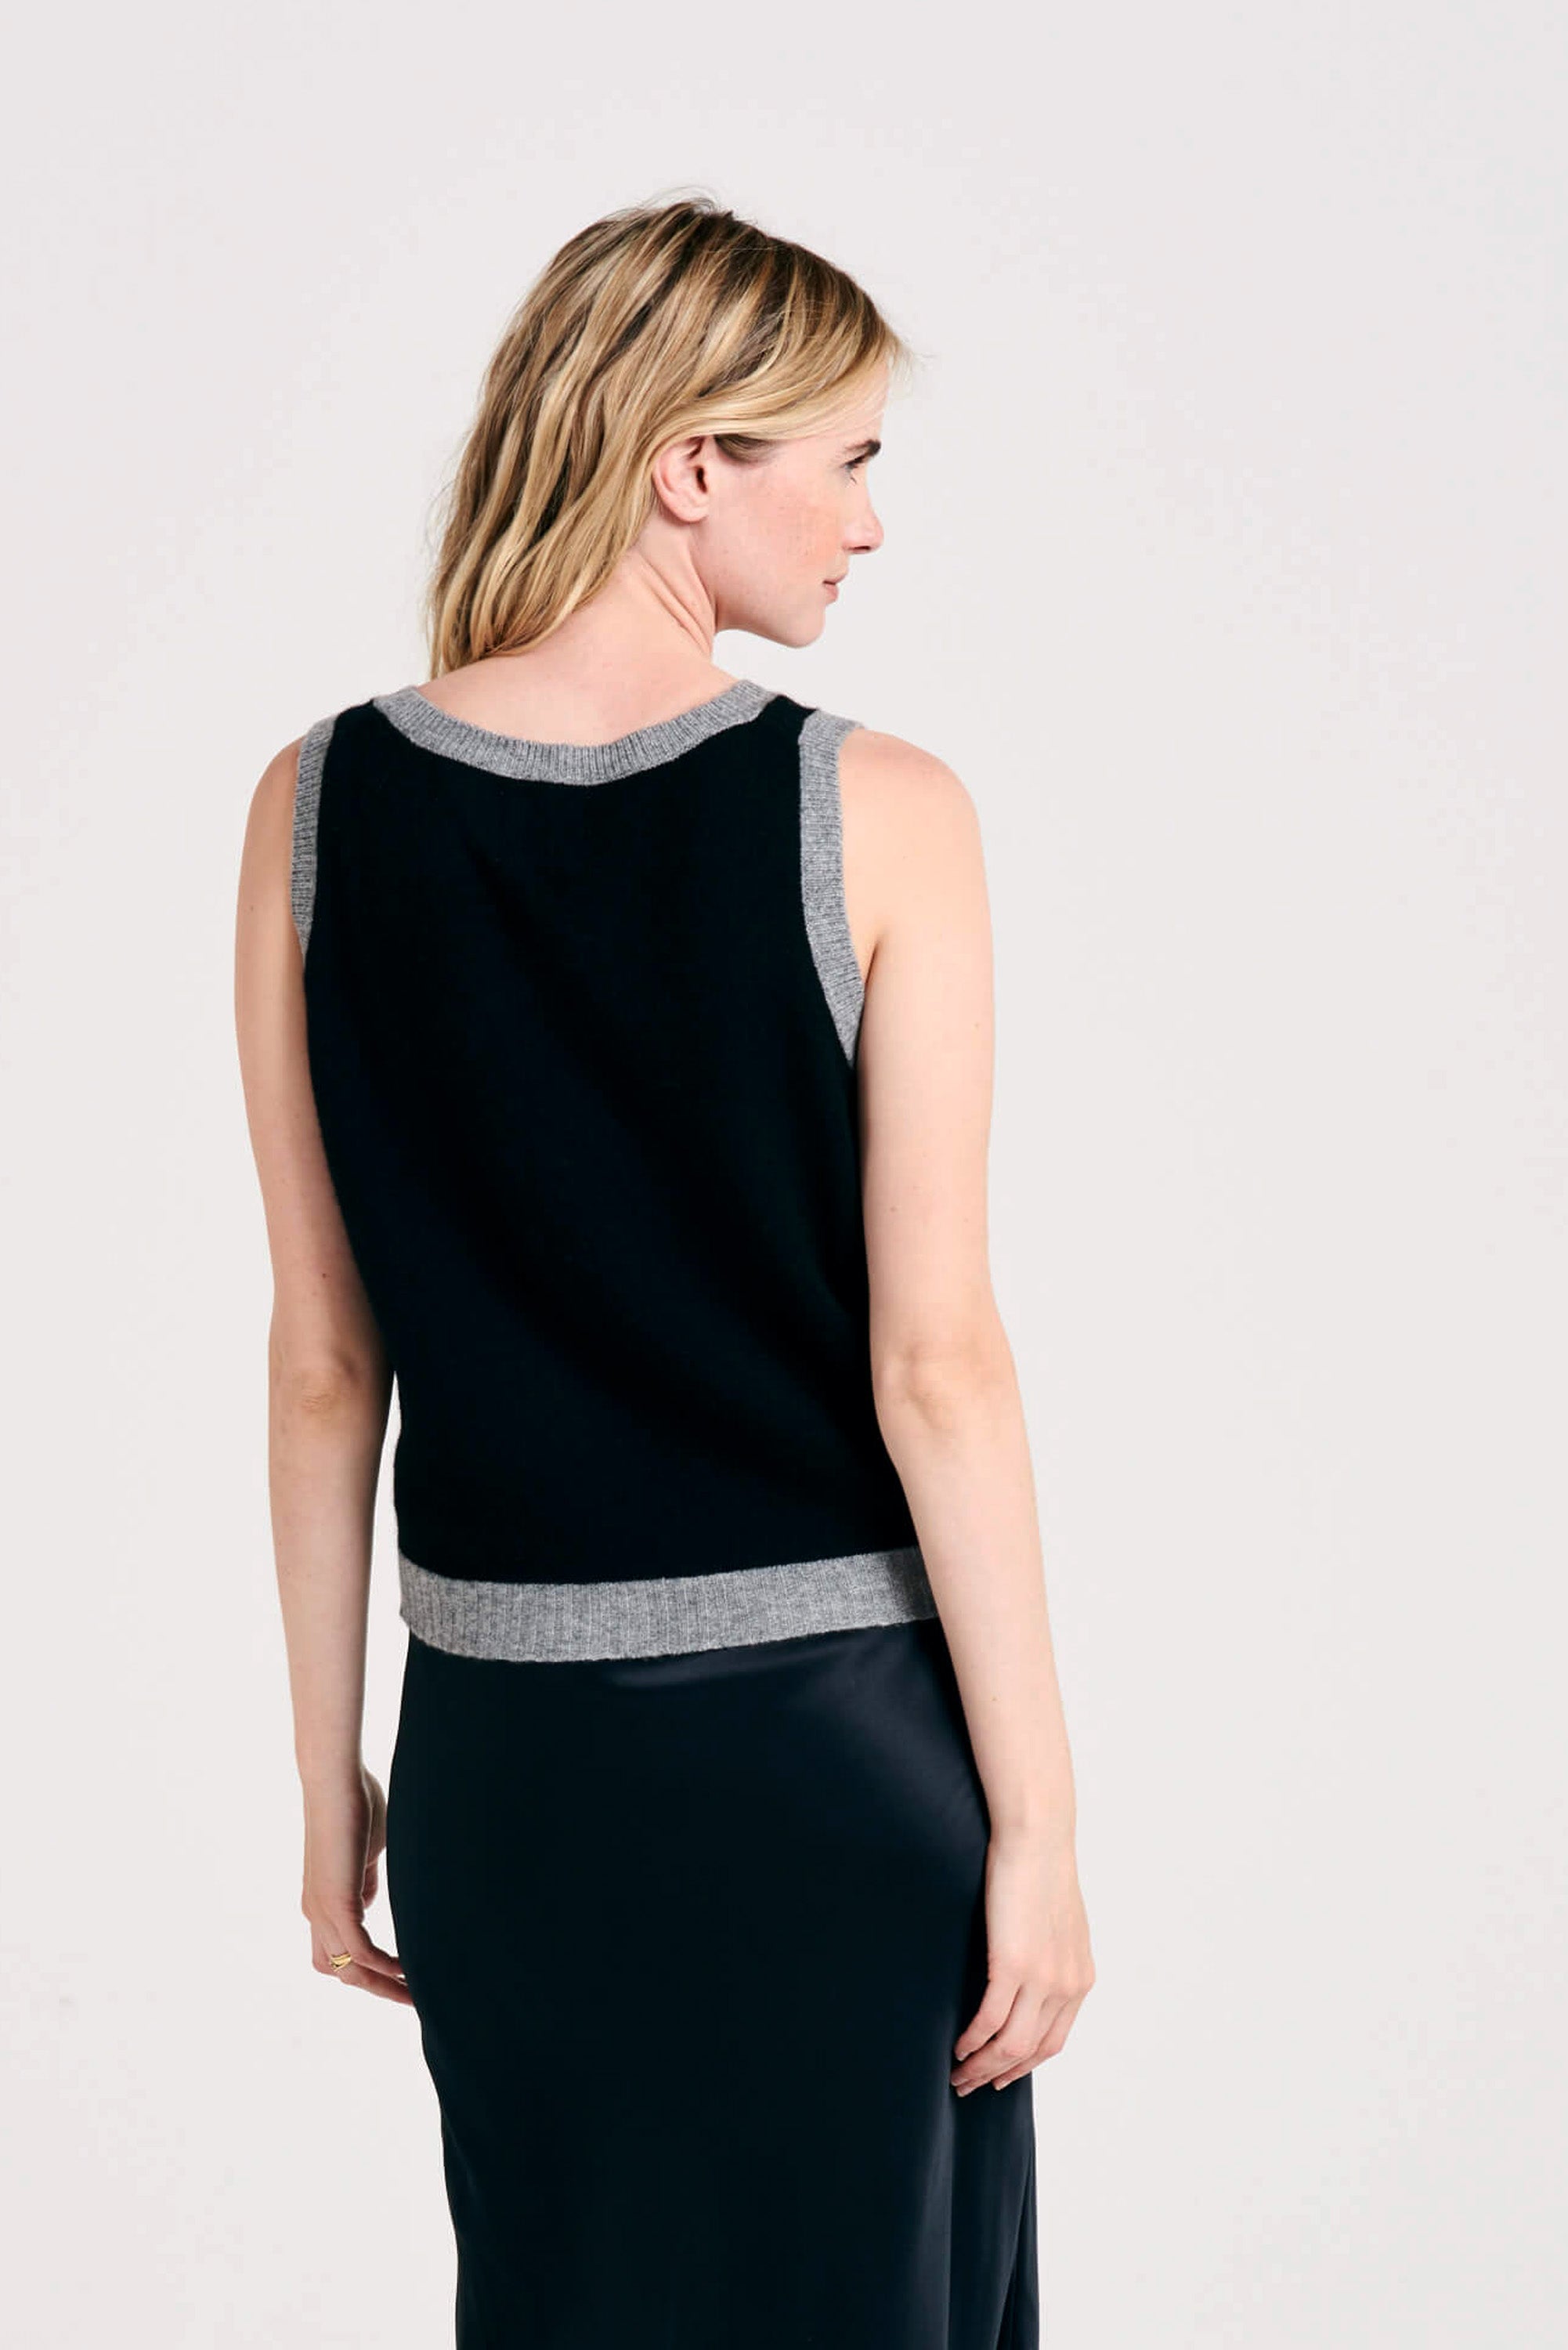 Blonde female model wearing Jumper1234 contrast cashmere tank in black and mid grey facing away from the camera